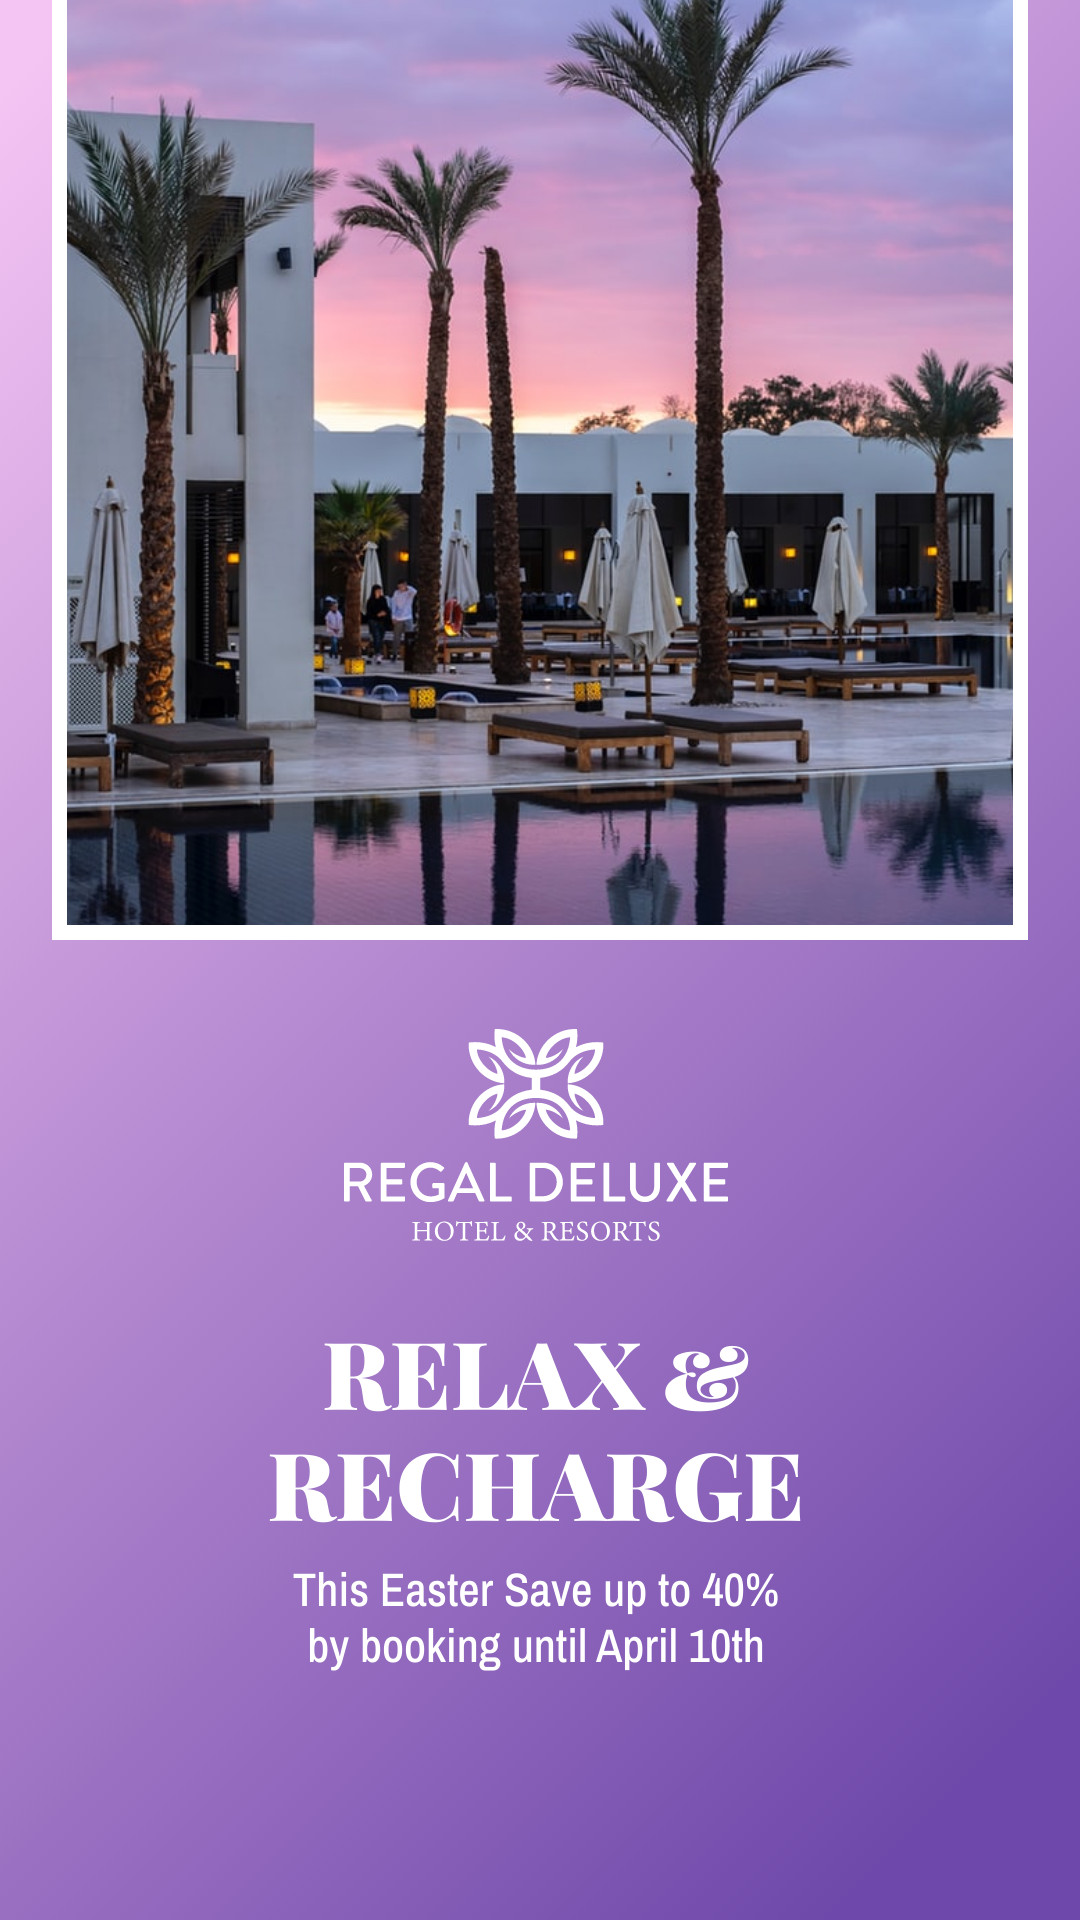 Relax and Recharge Easter Hotel Offer